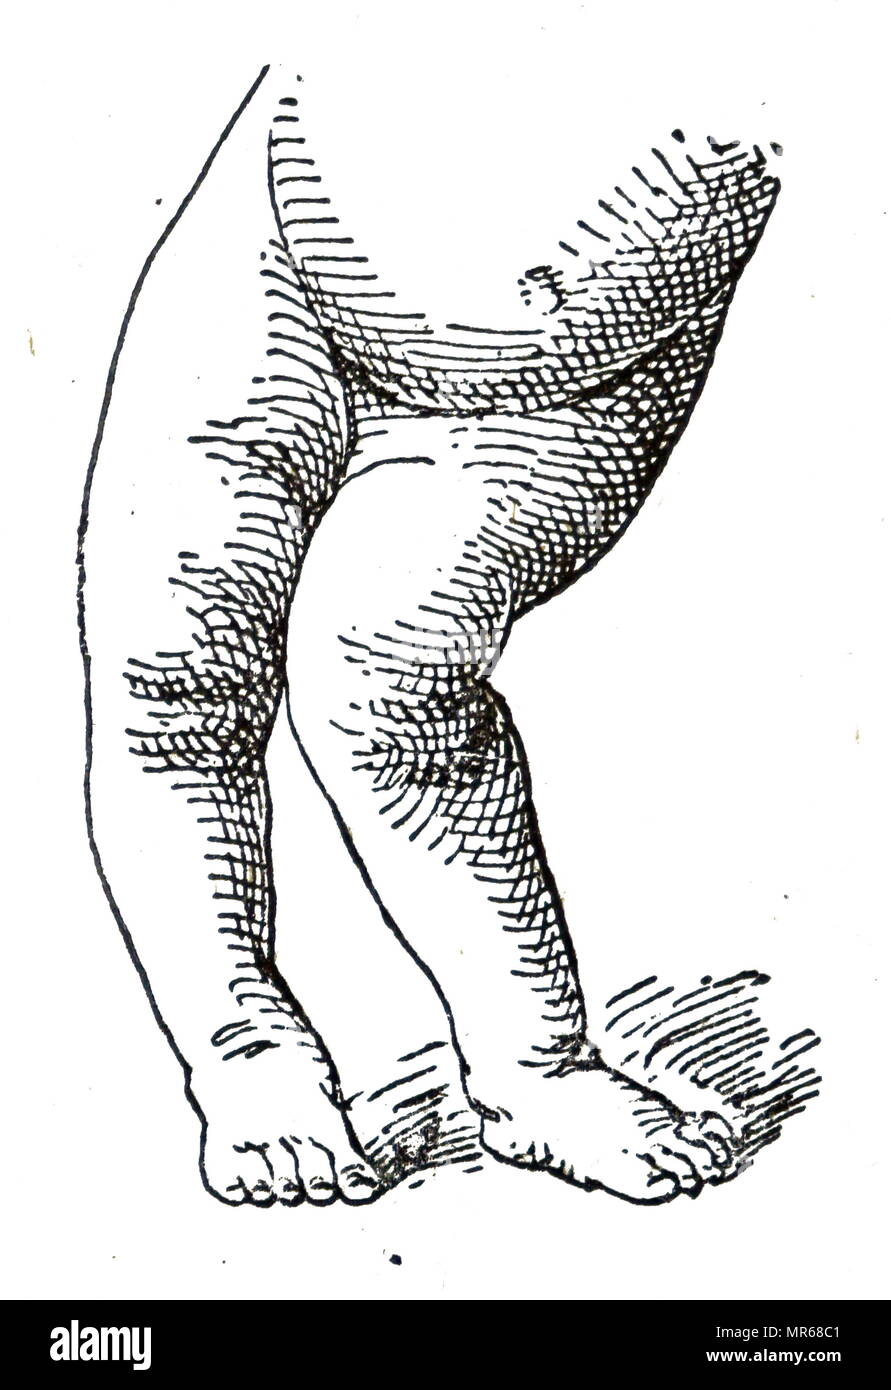 Illustration depicting the affects of Rickets of a boy aged 3, showing shortening and distortion of legs and position of the abdomen.  Rickets is defective mineralisation or calcification of bones before epiphyseal closure in immature mammals due to deficiency or impaired metabolism of vitamin D, phosphorus or calcium, potentially leading to fractures and deformity. Dated 20th century Stock Photo